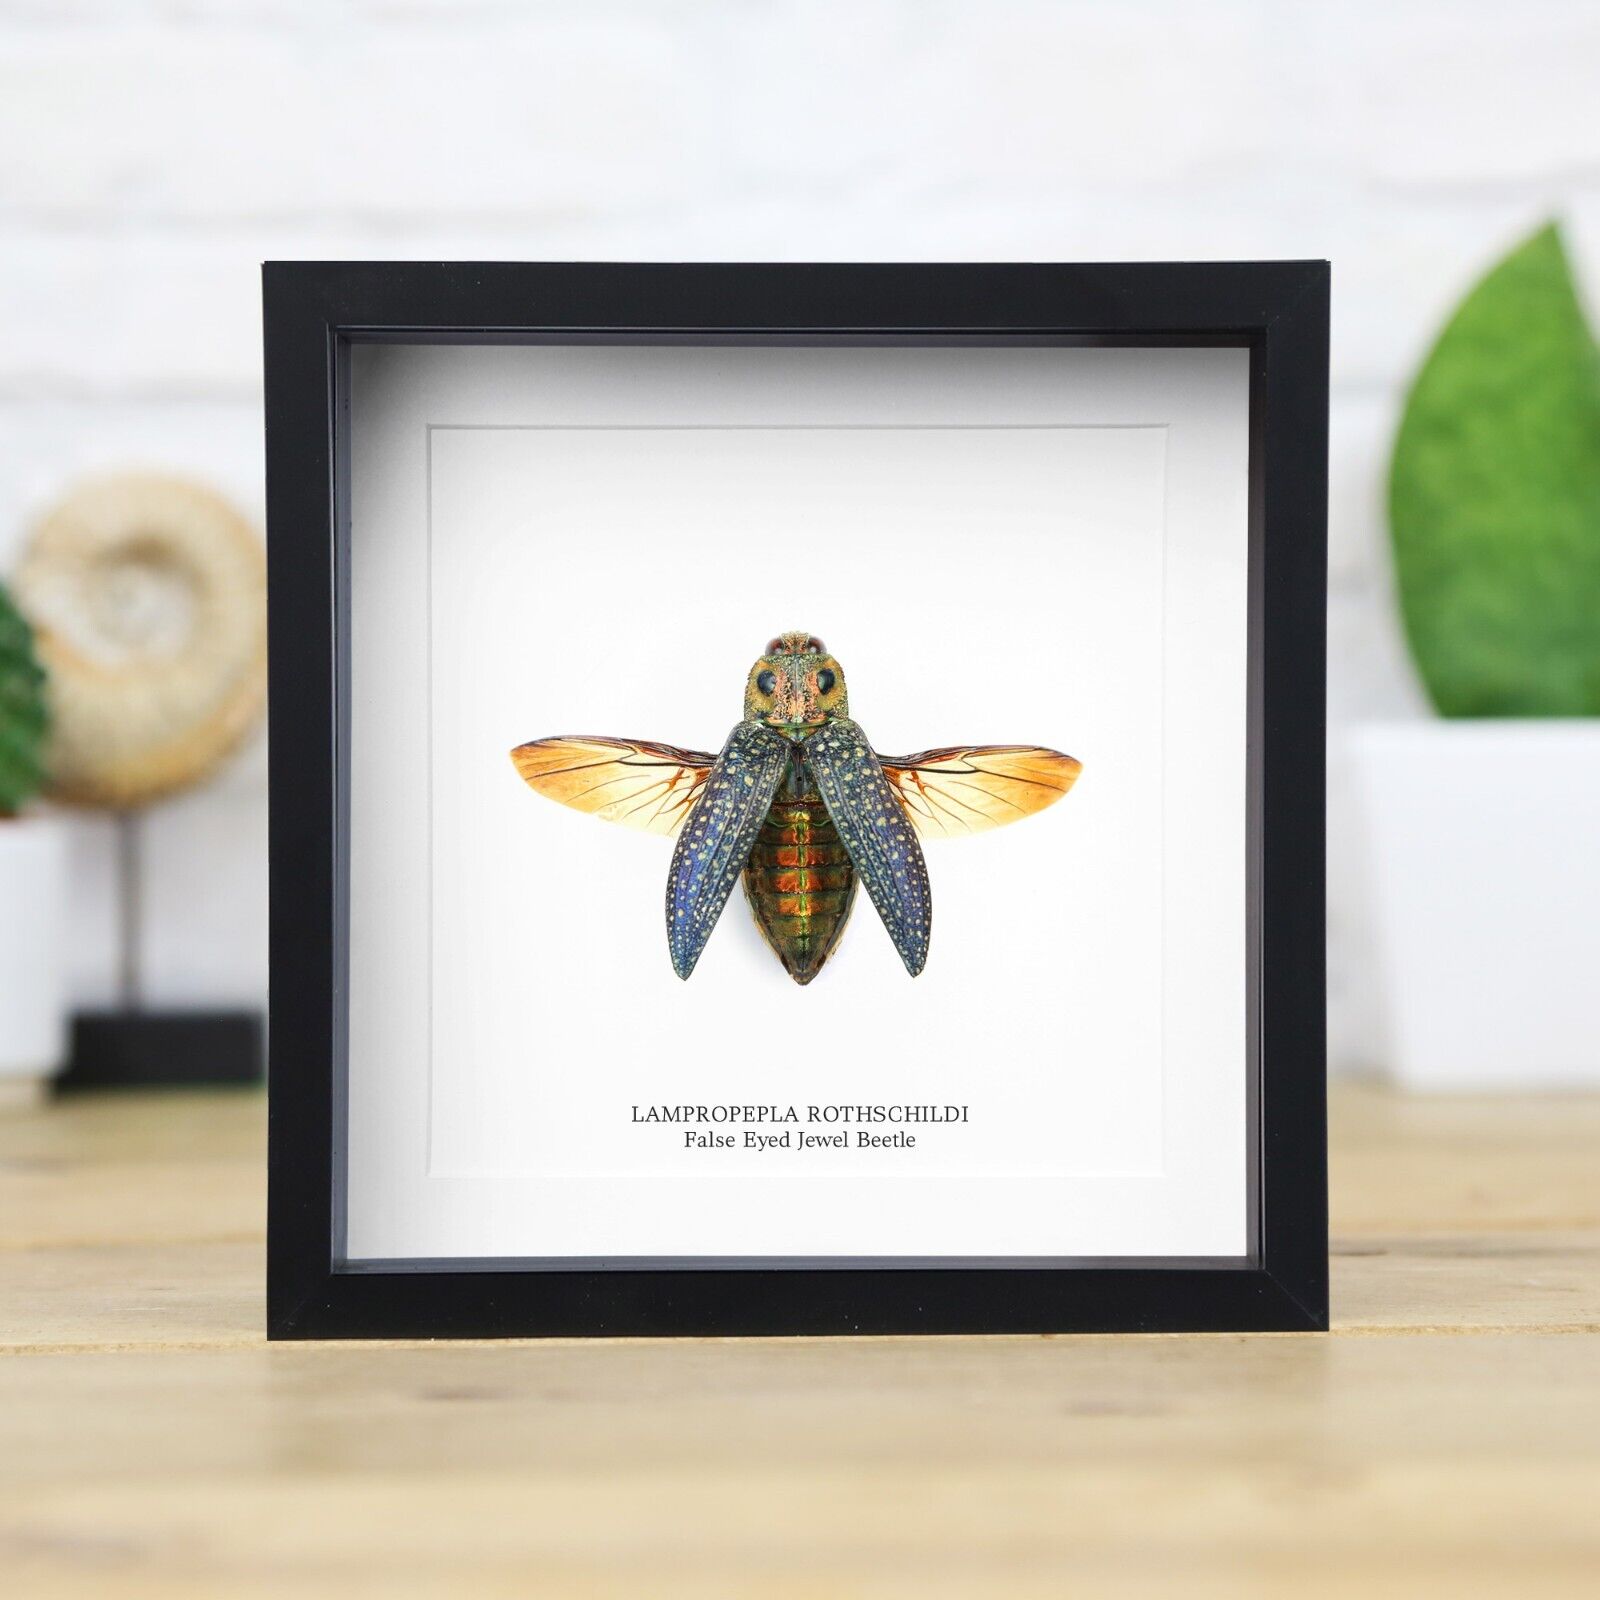 False Eyed Jewel Beetle Insect Taxidermy Box Frame Home Decor Interior Design